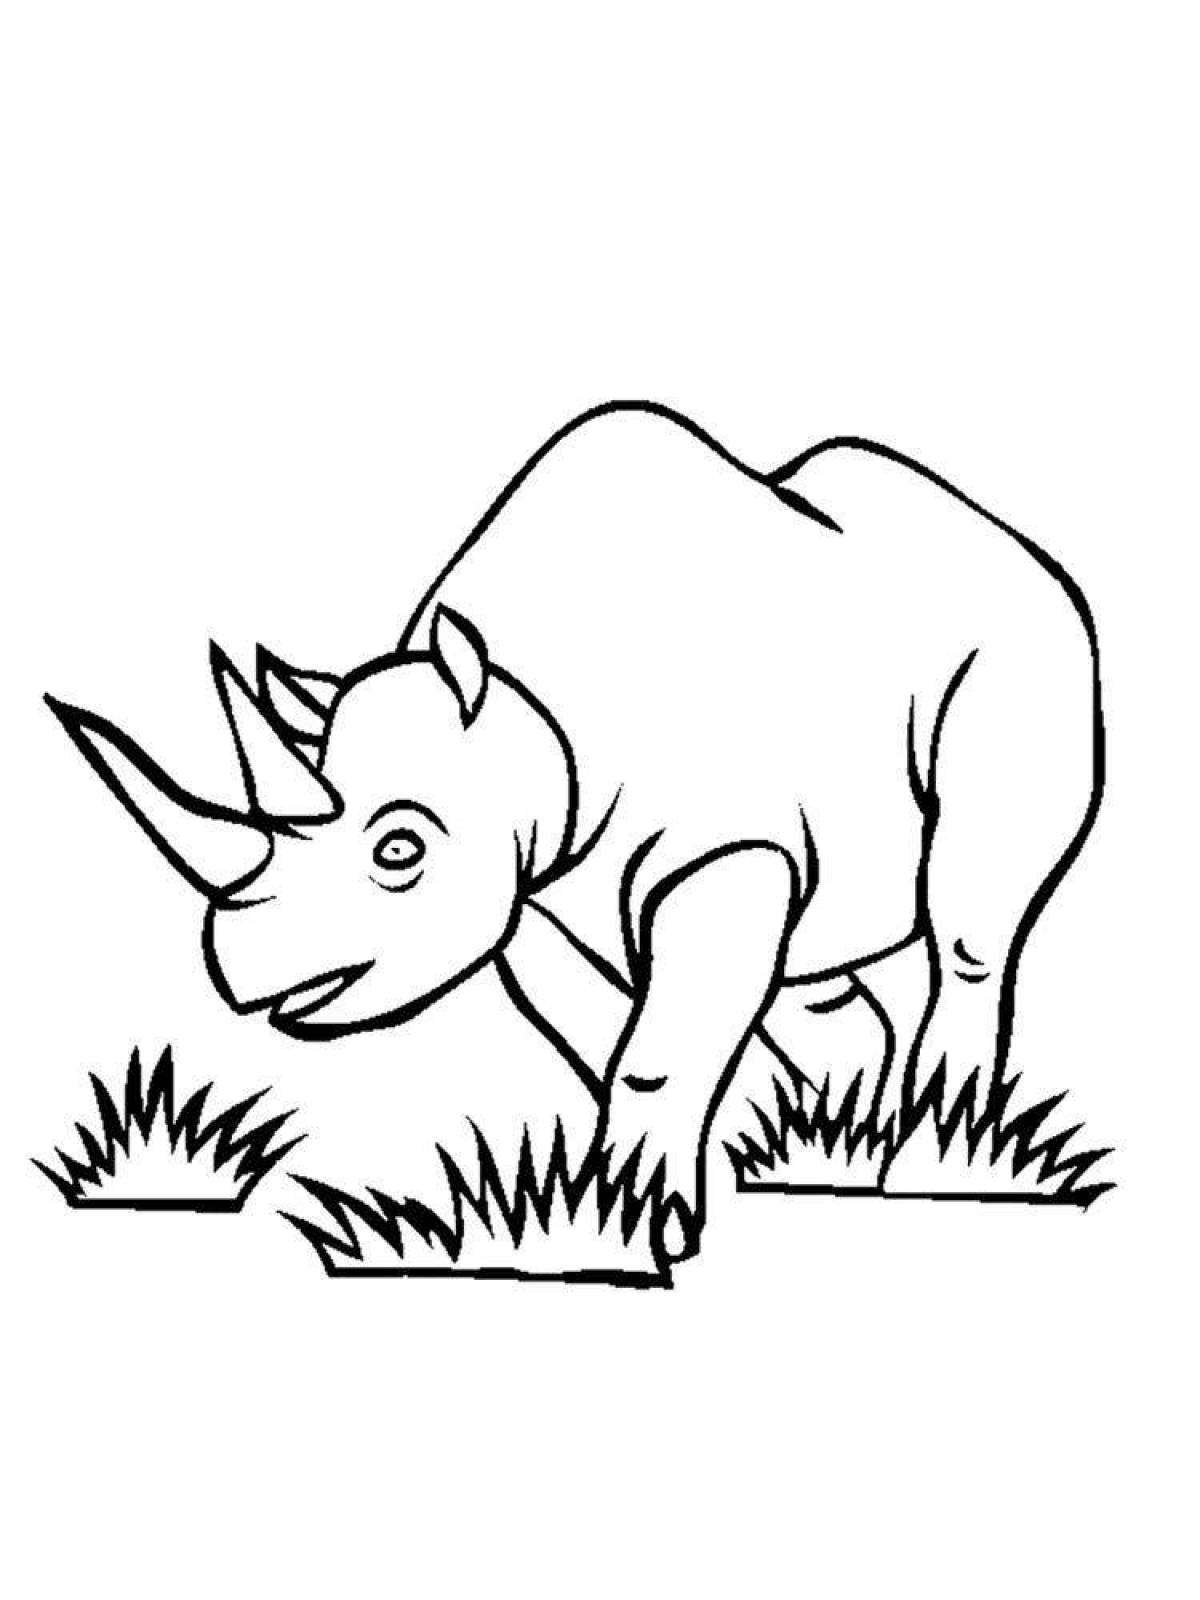 A playful rhinoceros coloring book for kids